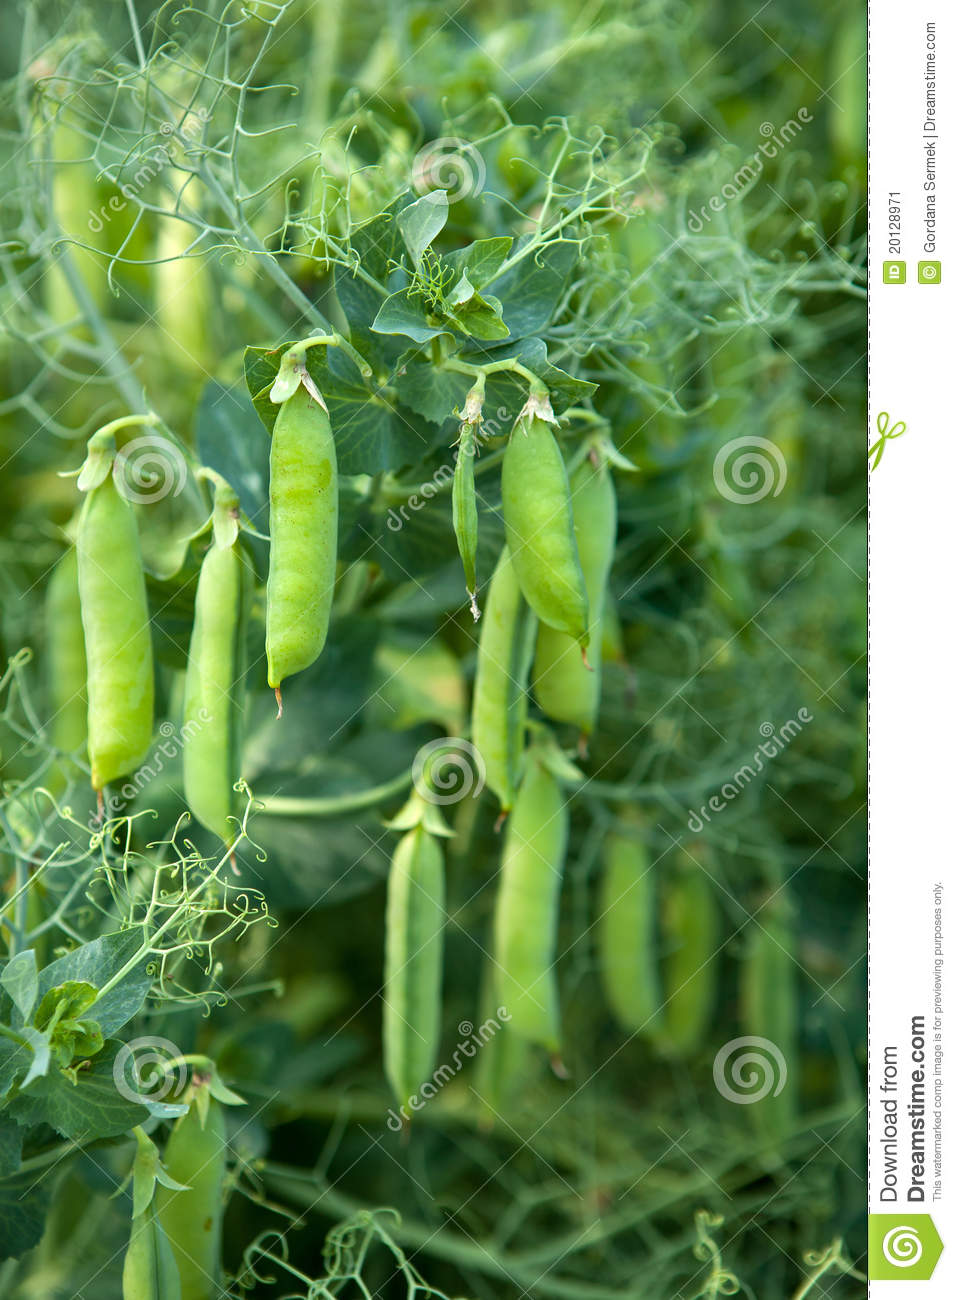 Pea Plant Clipart Pea Plant Vegetable In A